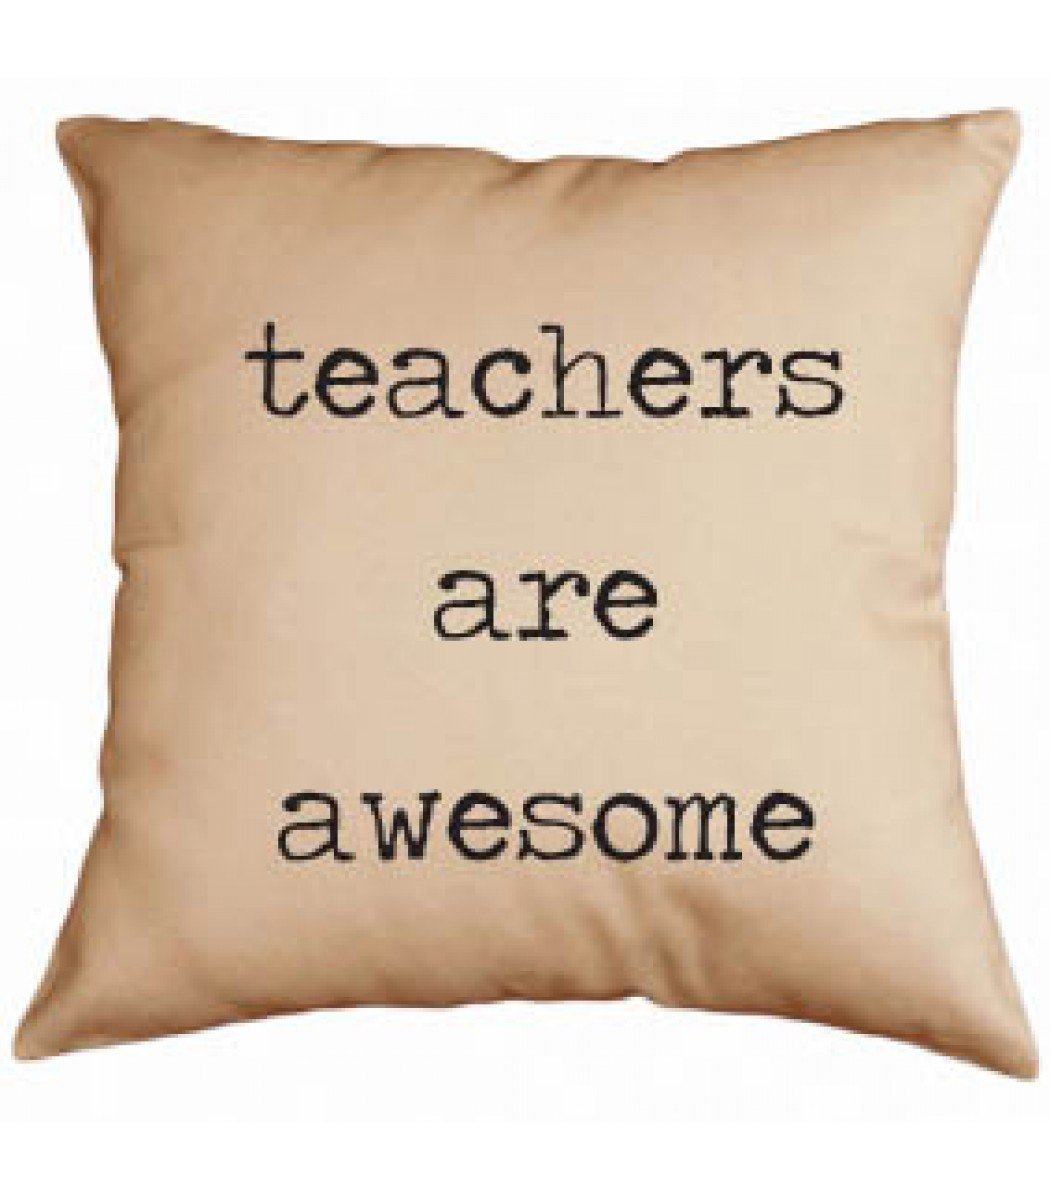 Teachers are awesome!